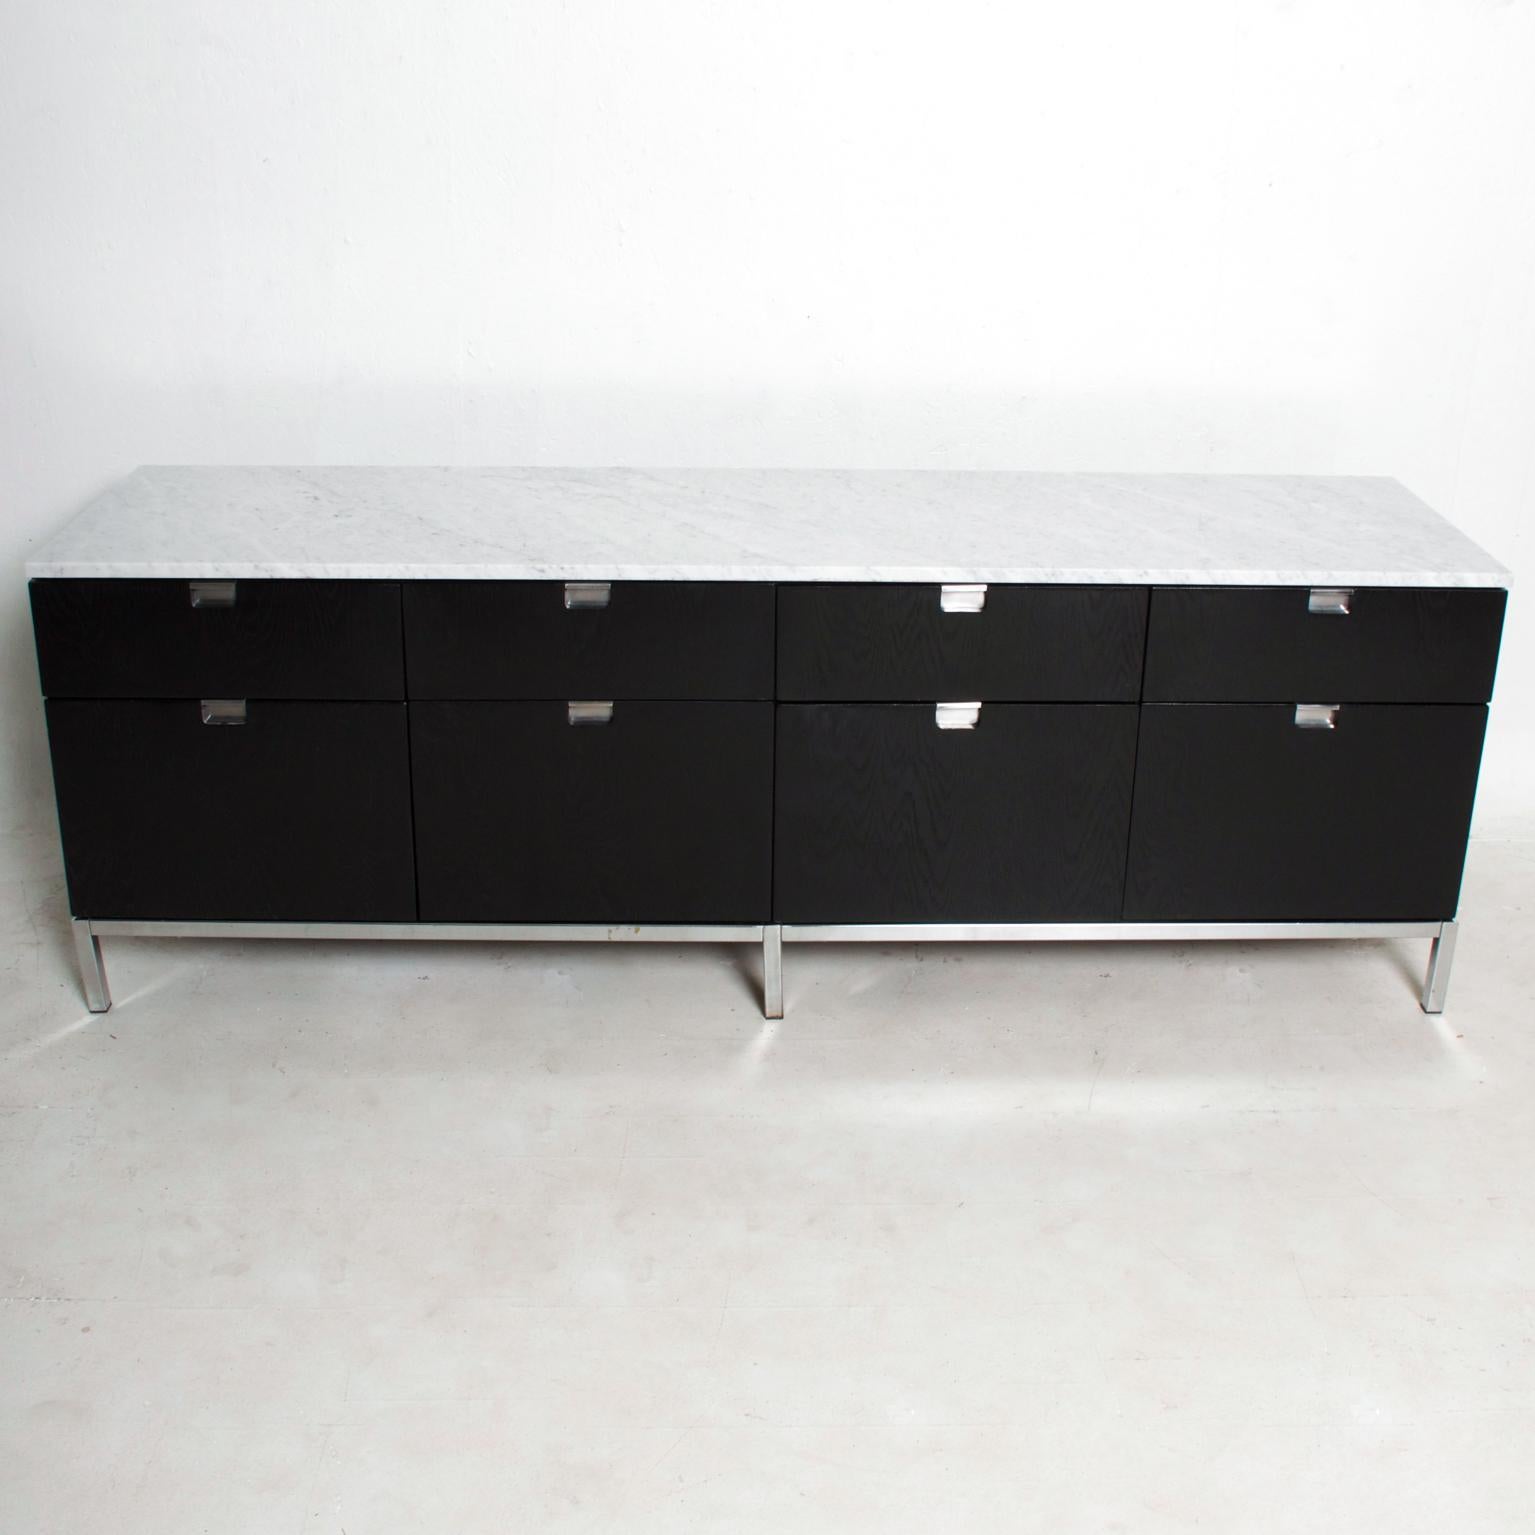 For your consideration, a Florence Knoll credenza with white Carrera marble in black oak. Stamped with knoll label in the upper drawer. Ebonized oak with white Carrera marble top. Original chrome-plated base. Finished on the back. Dimensions: